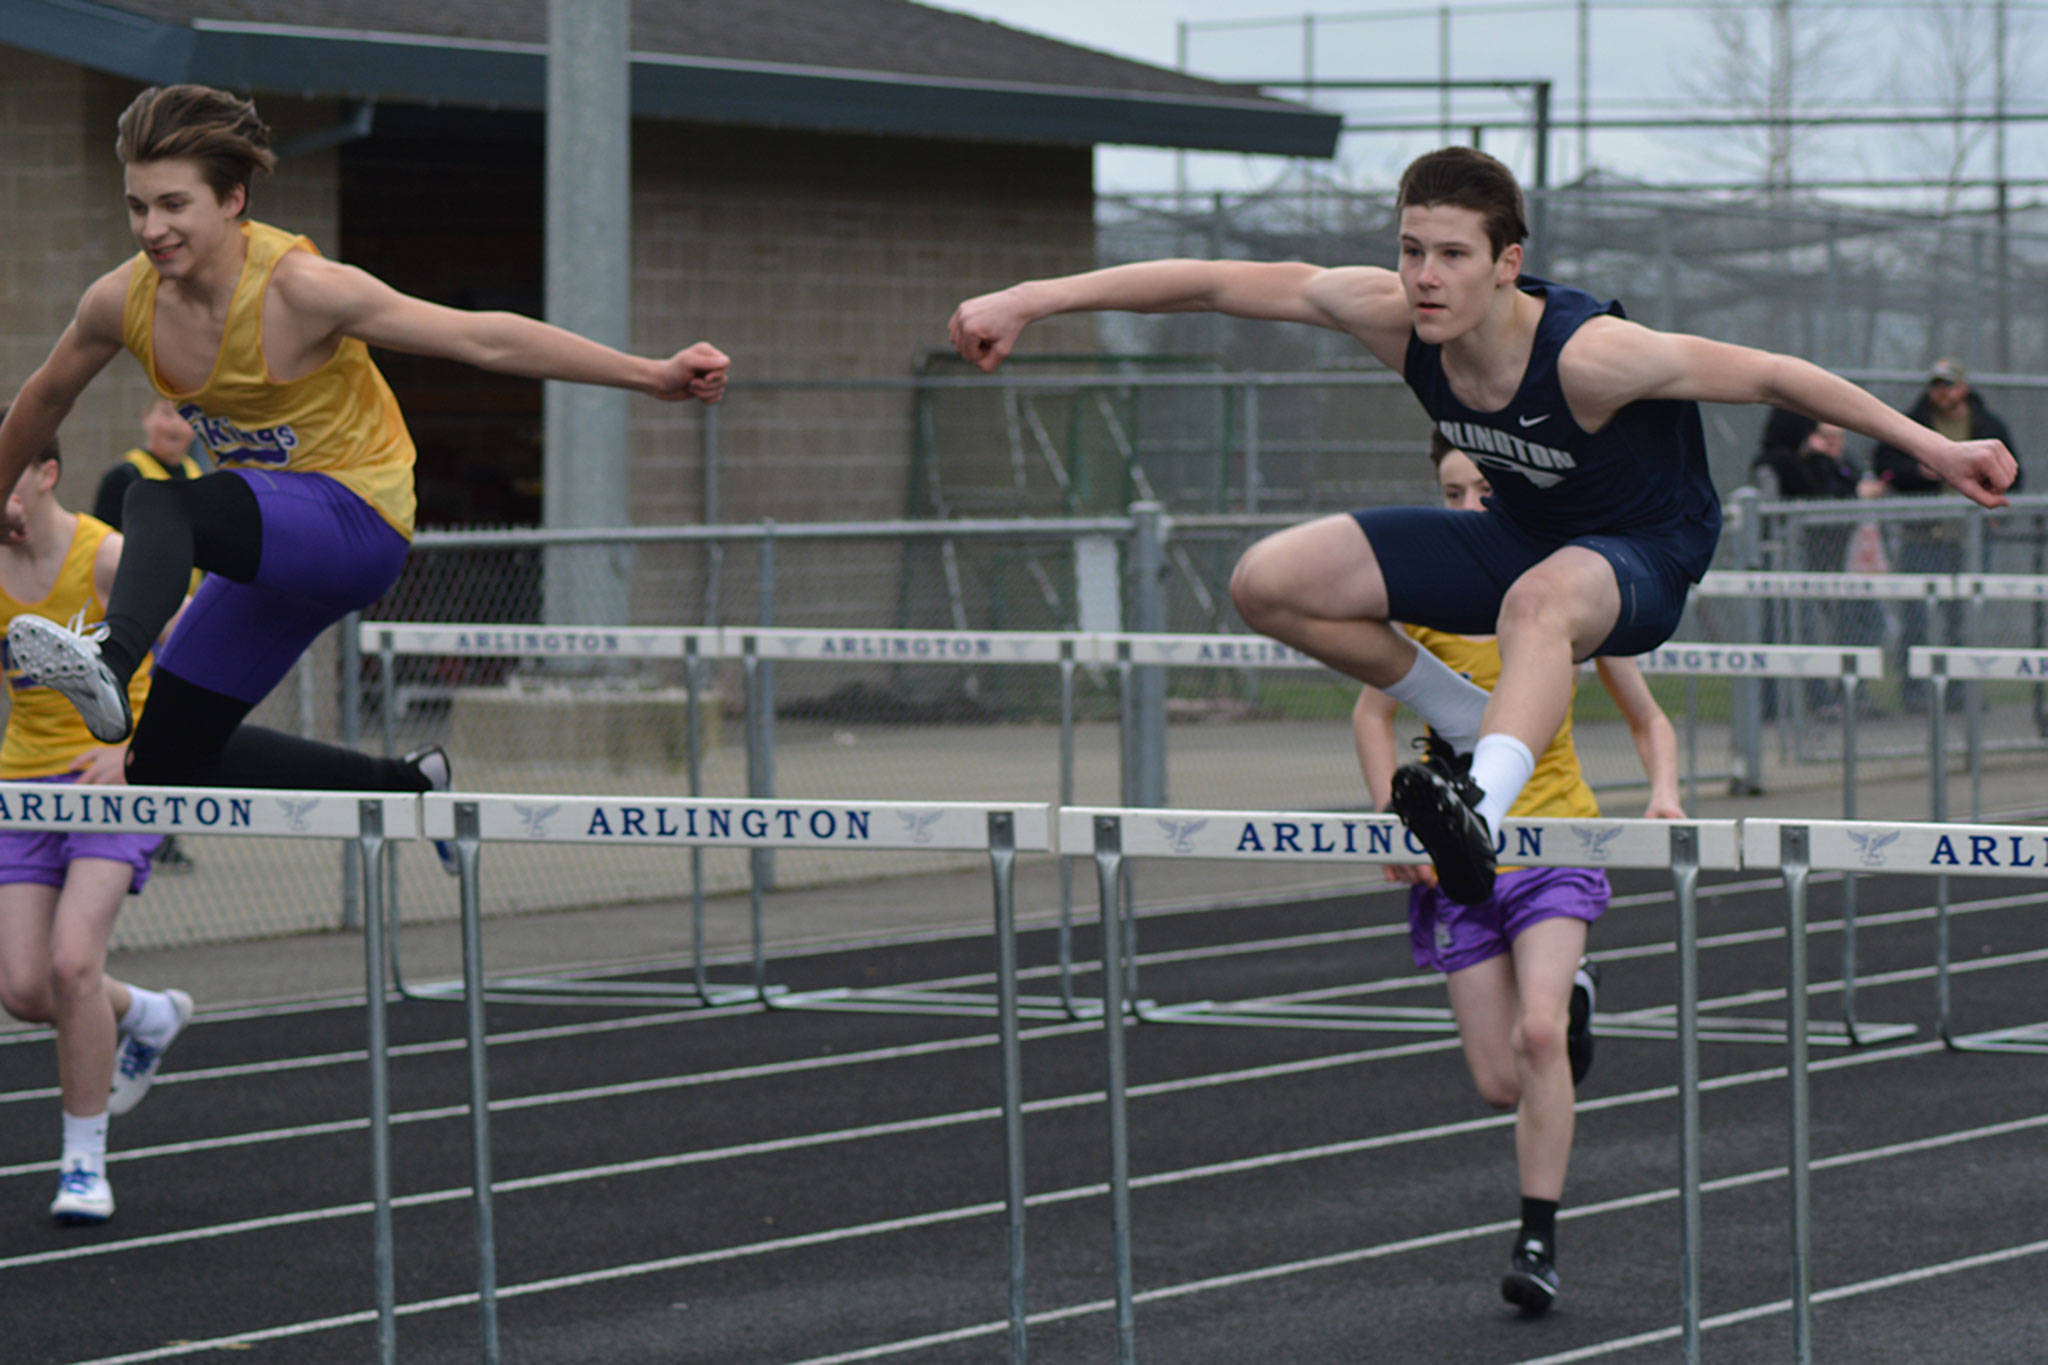 Arlington, MG Chargers compete in track (slide show)